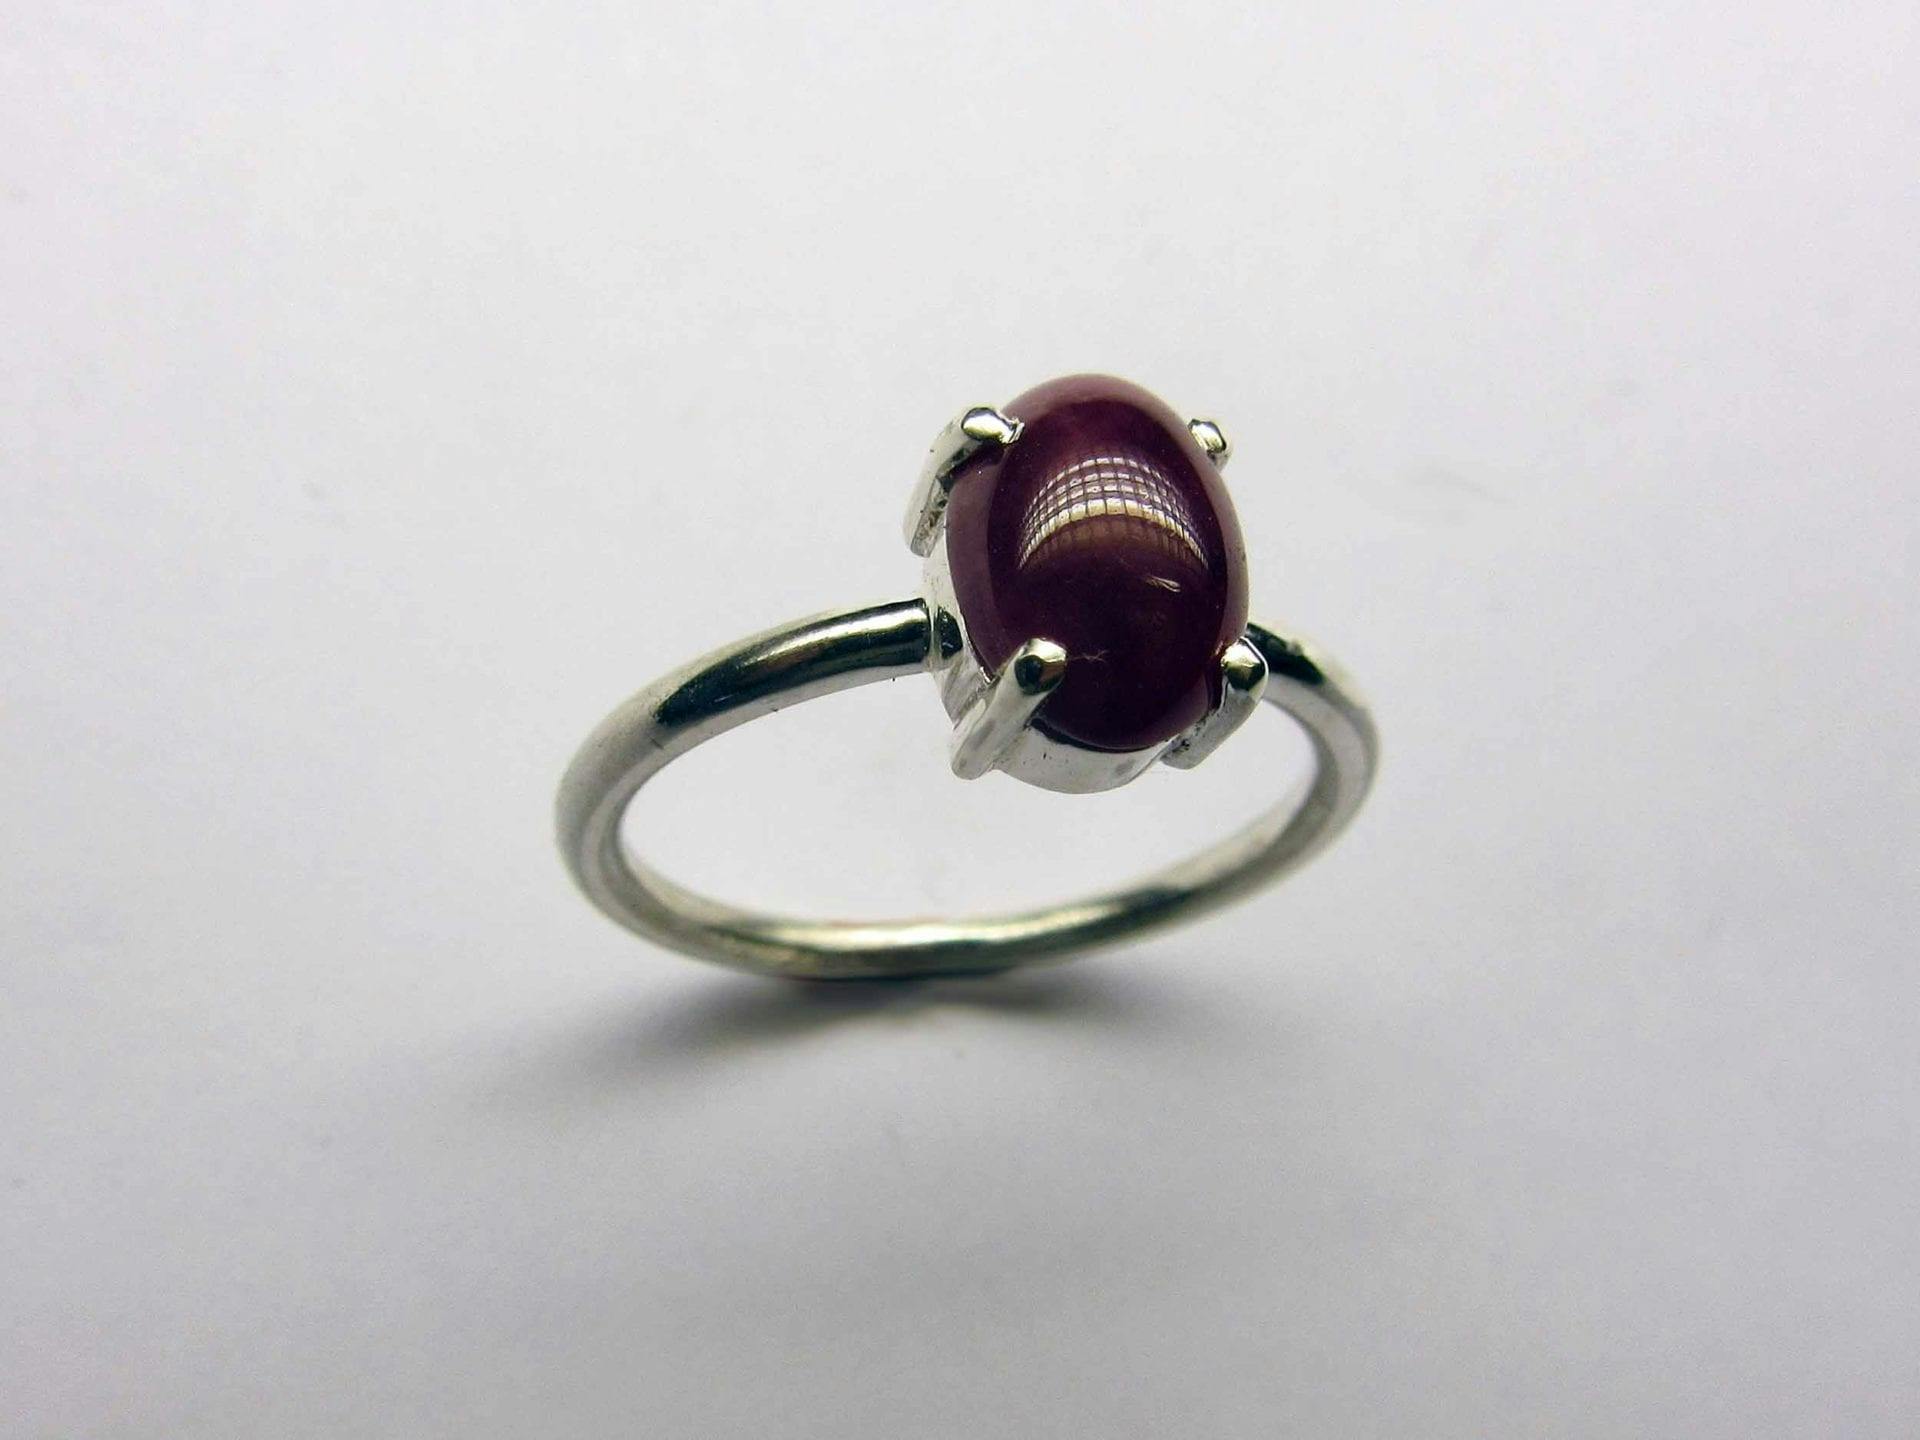 How to Make a Cabochon Stacking Ring